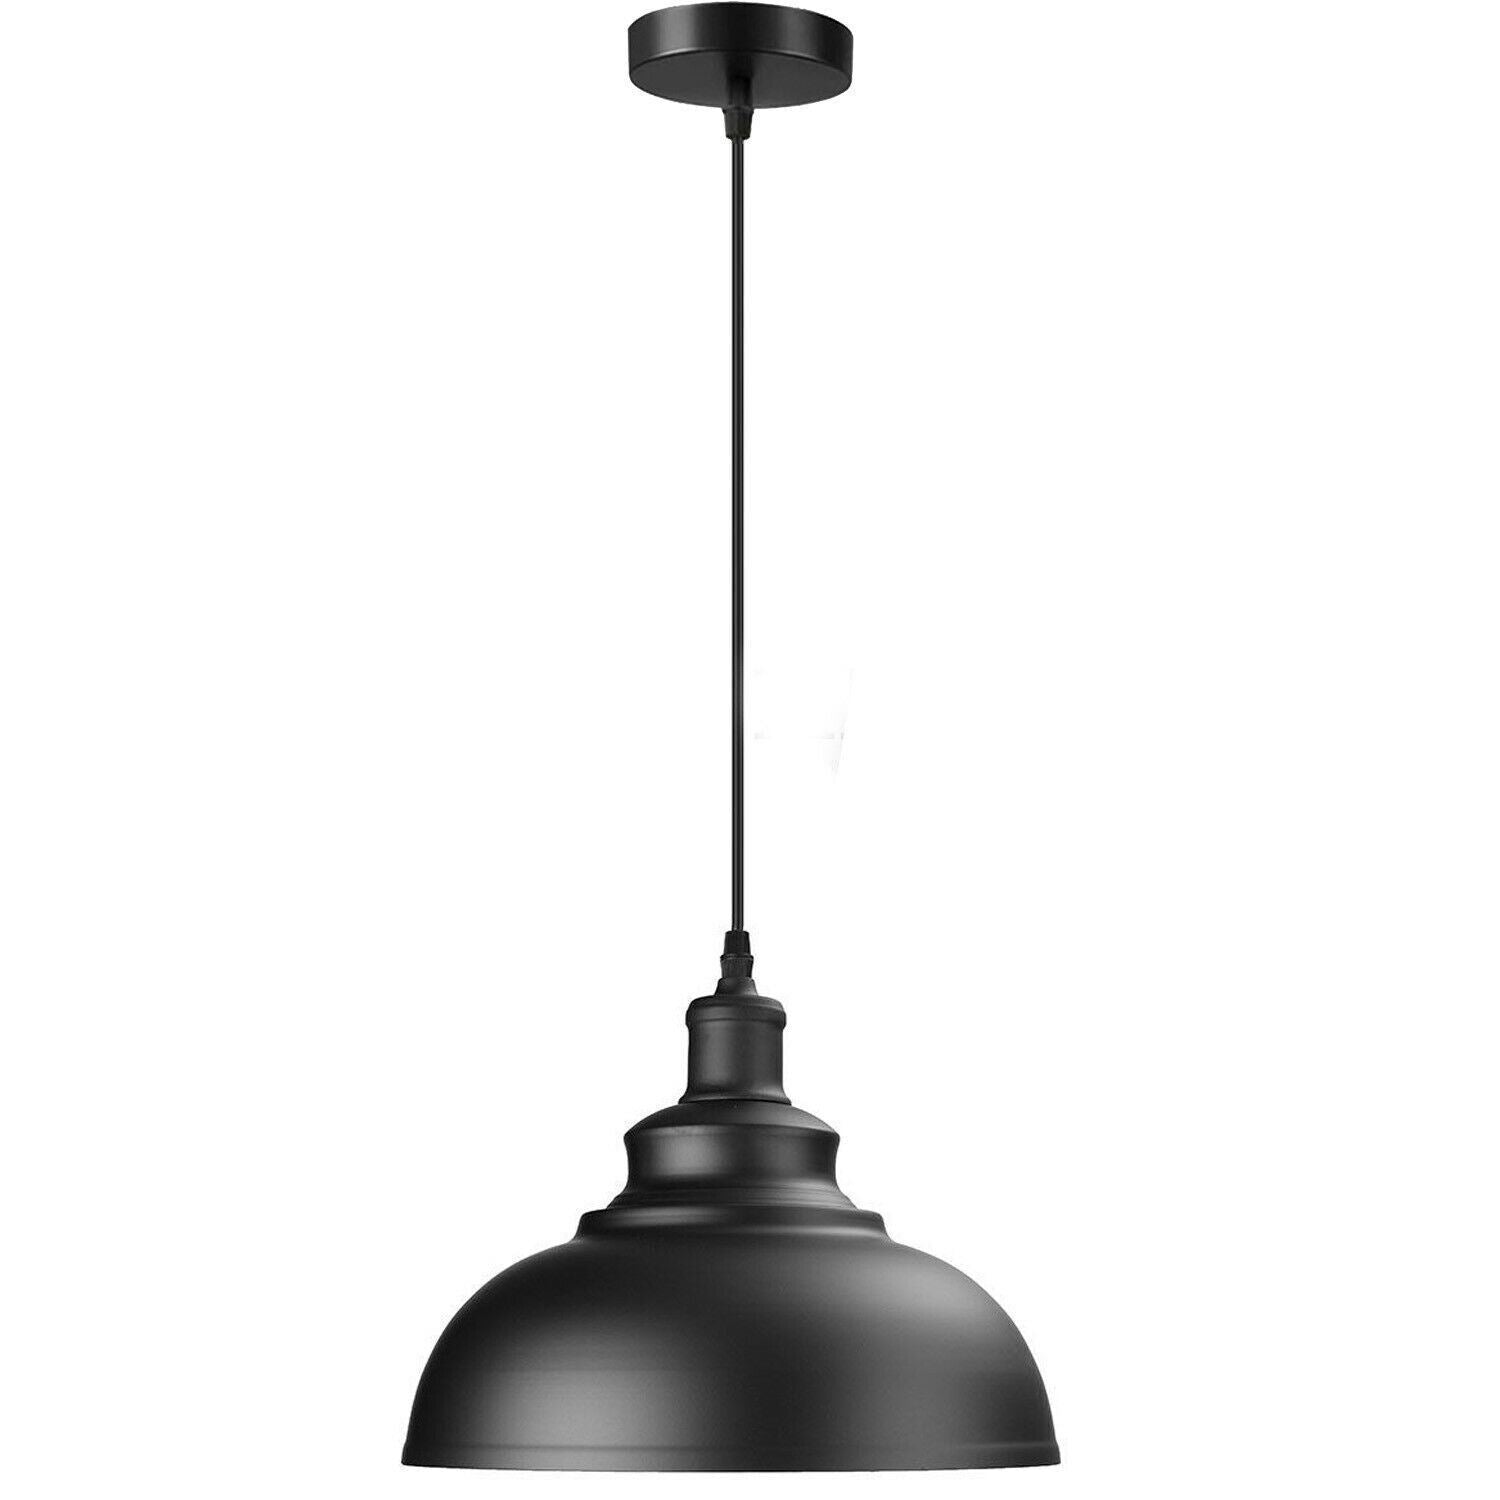 Black wire Shade Black Dome shade ceiling pendant Light